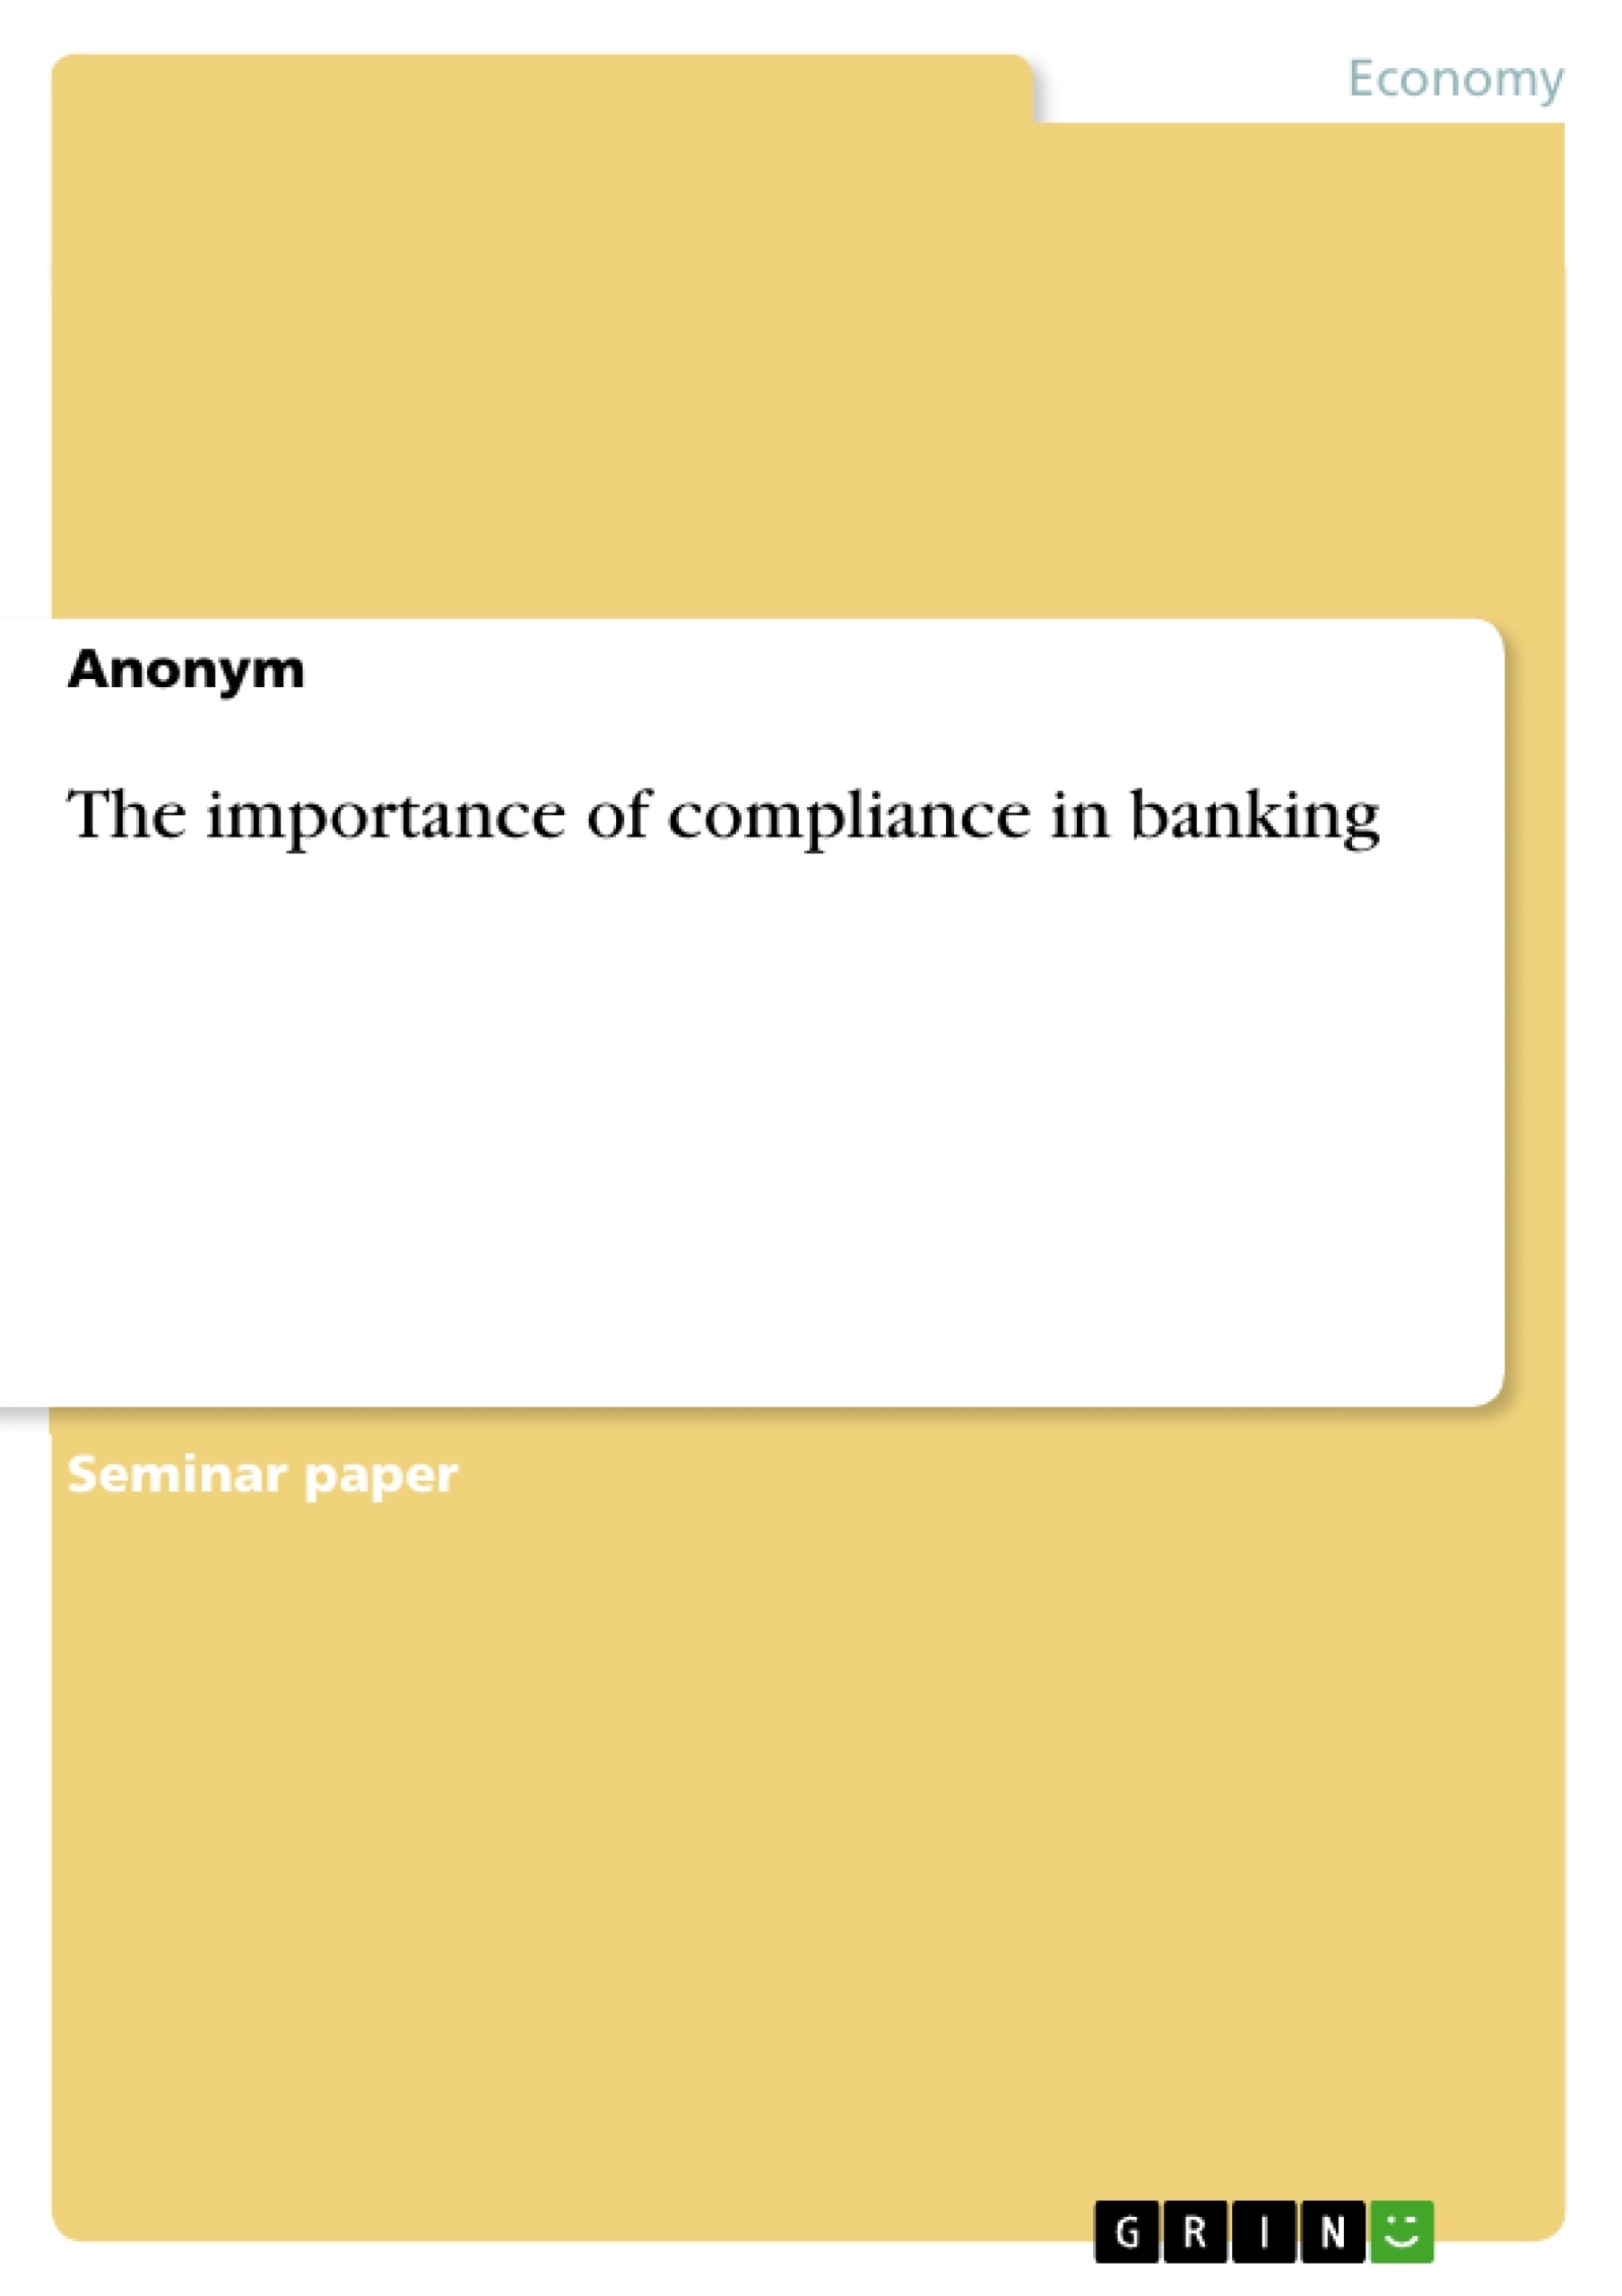 Title: The importance of compliance in banking